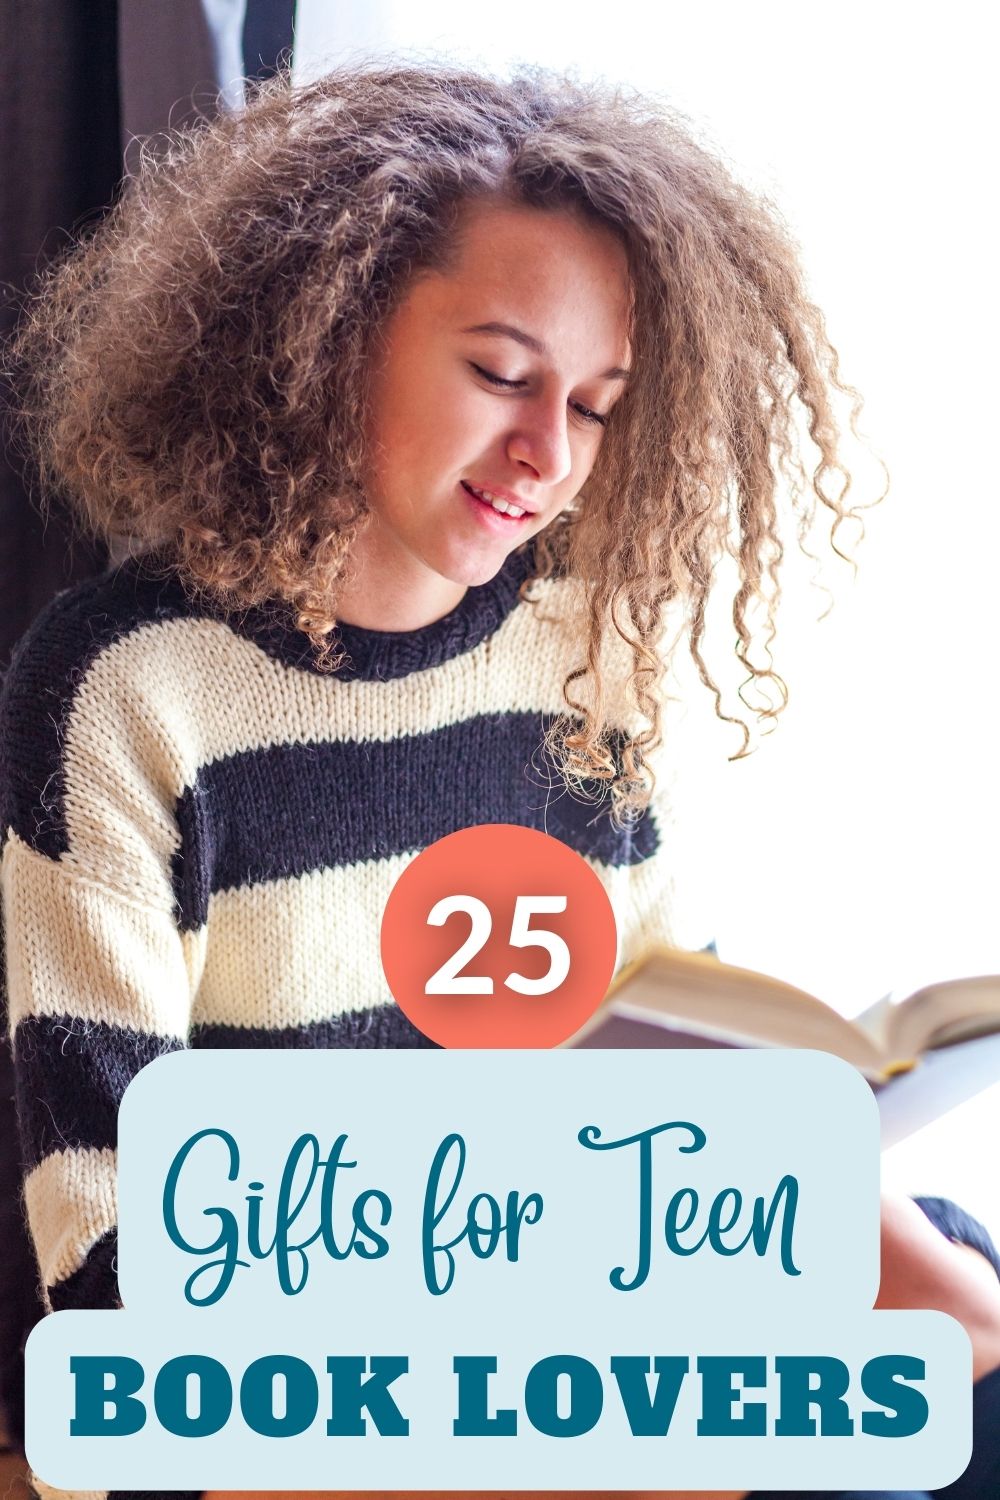 Best gift guide for teen book lovers and all the teenage book worms in your life.